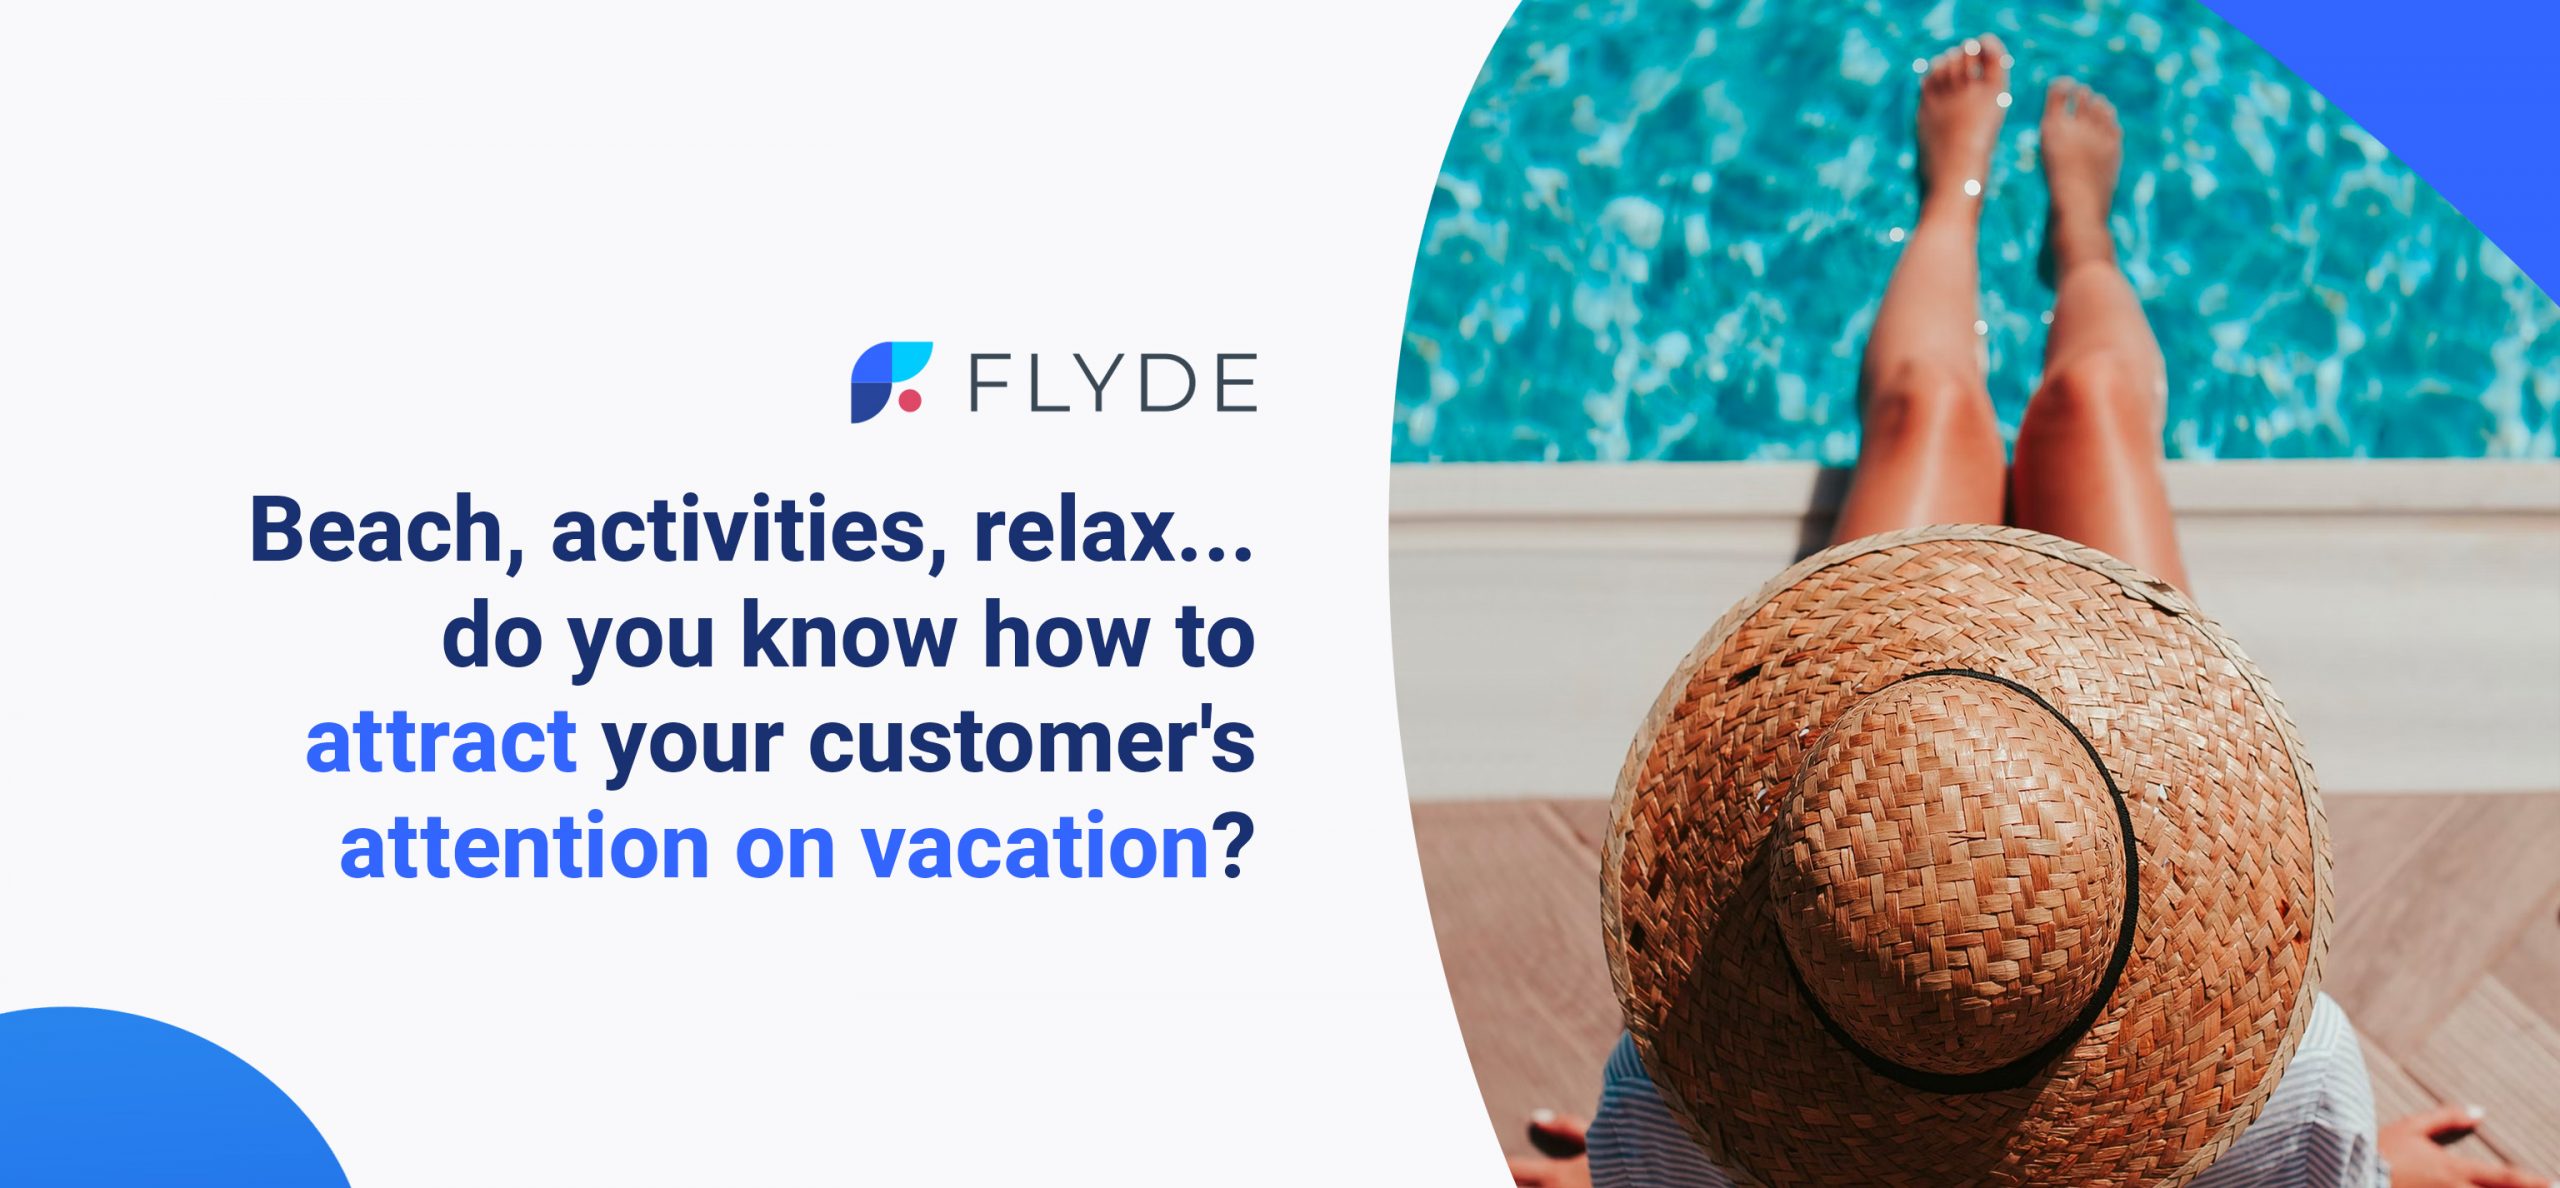 Beach, activities, relax... do you know how to attract your customer's attention on vacation?